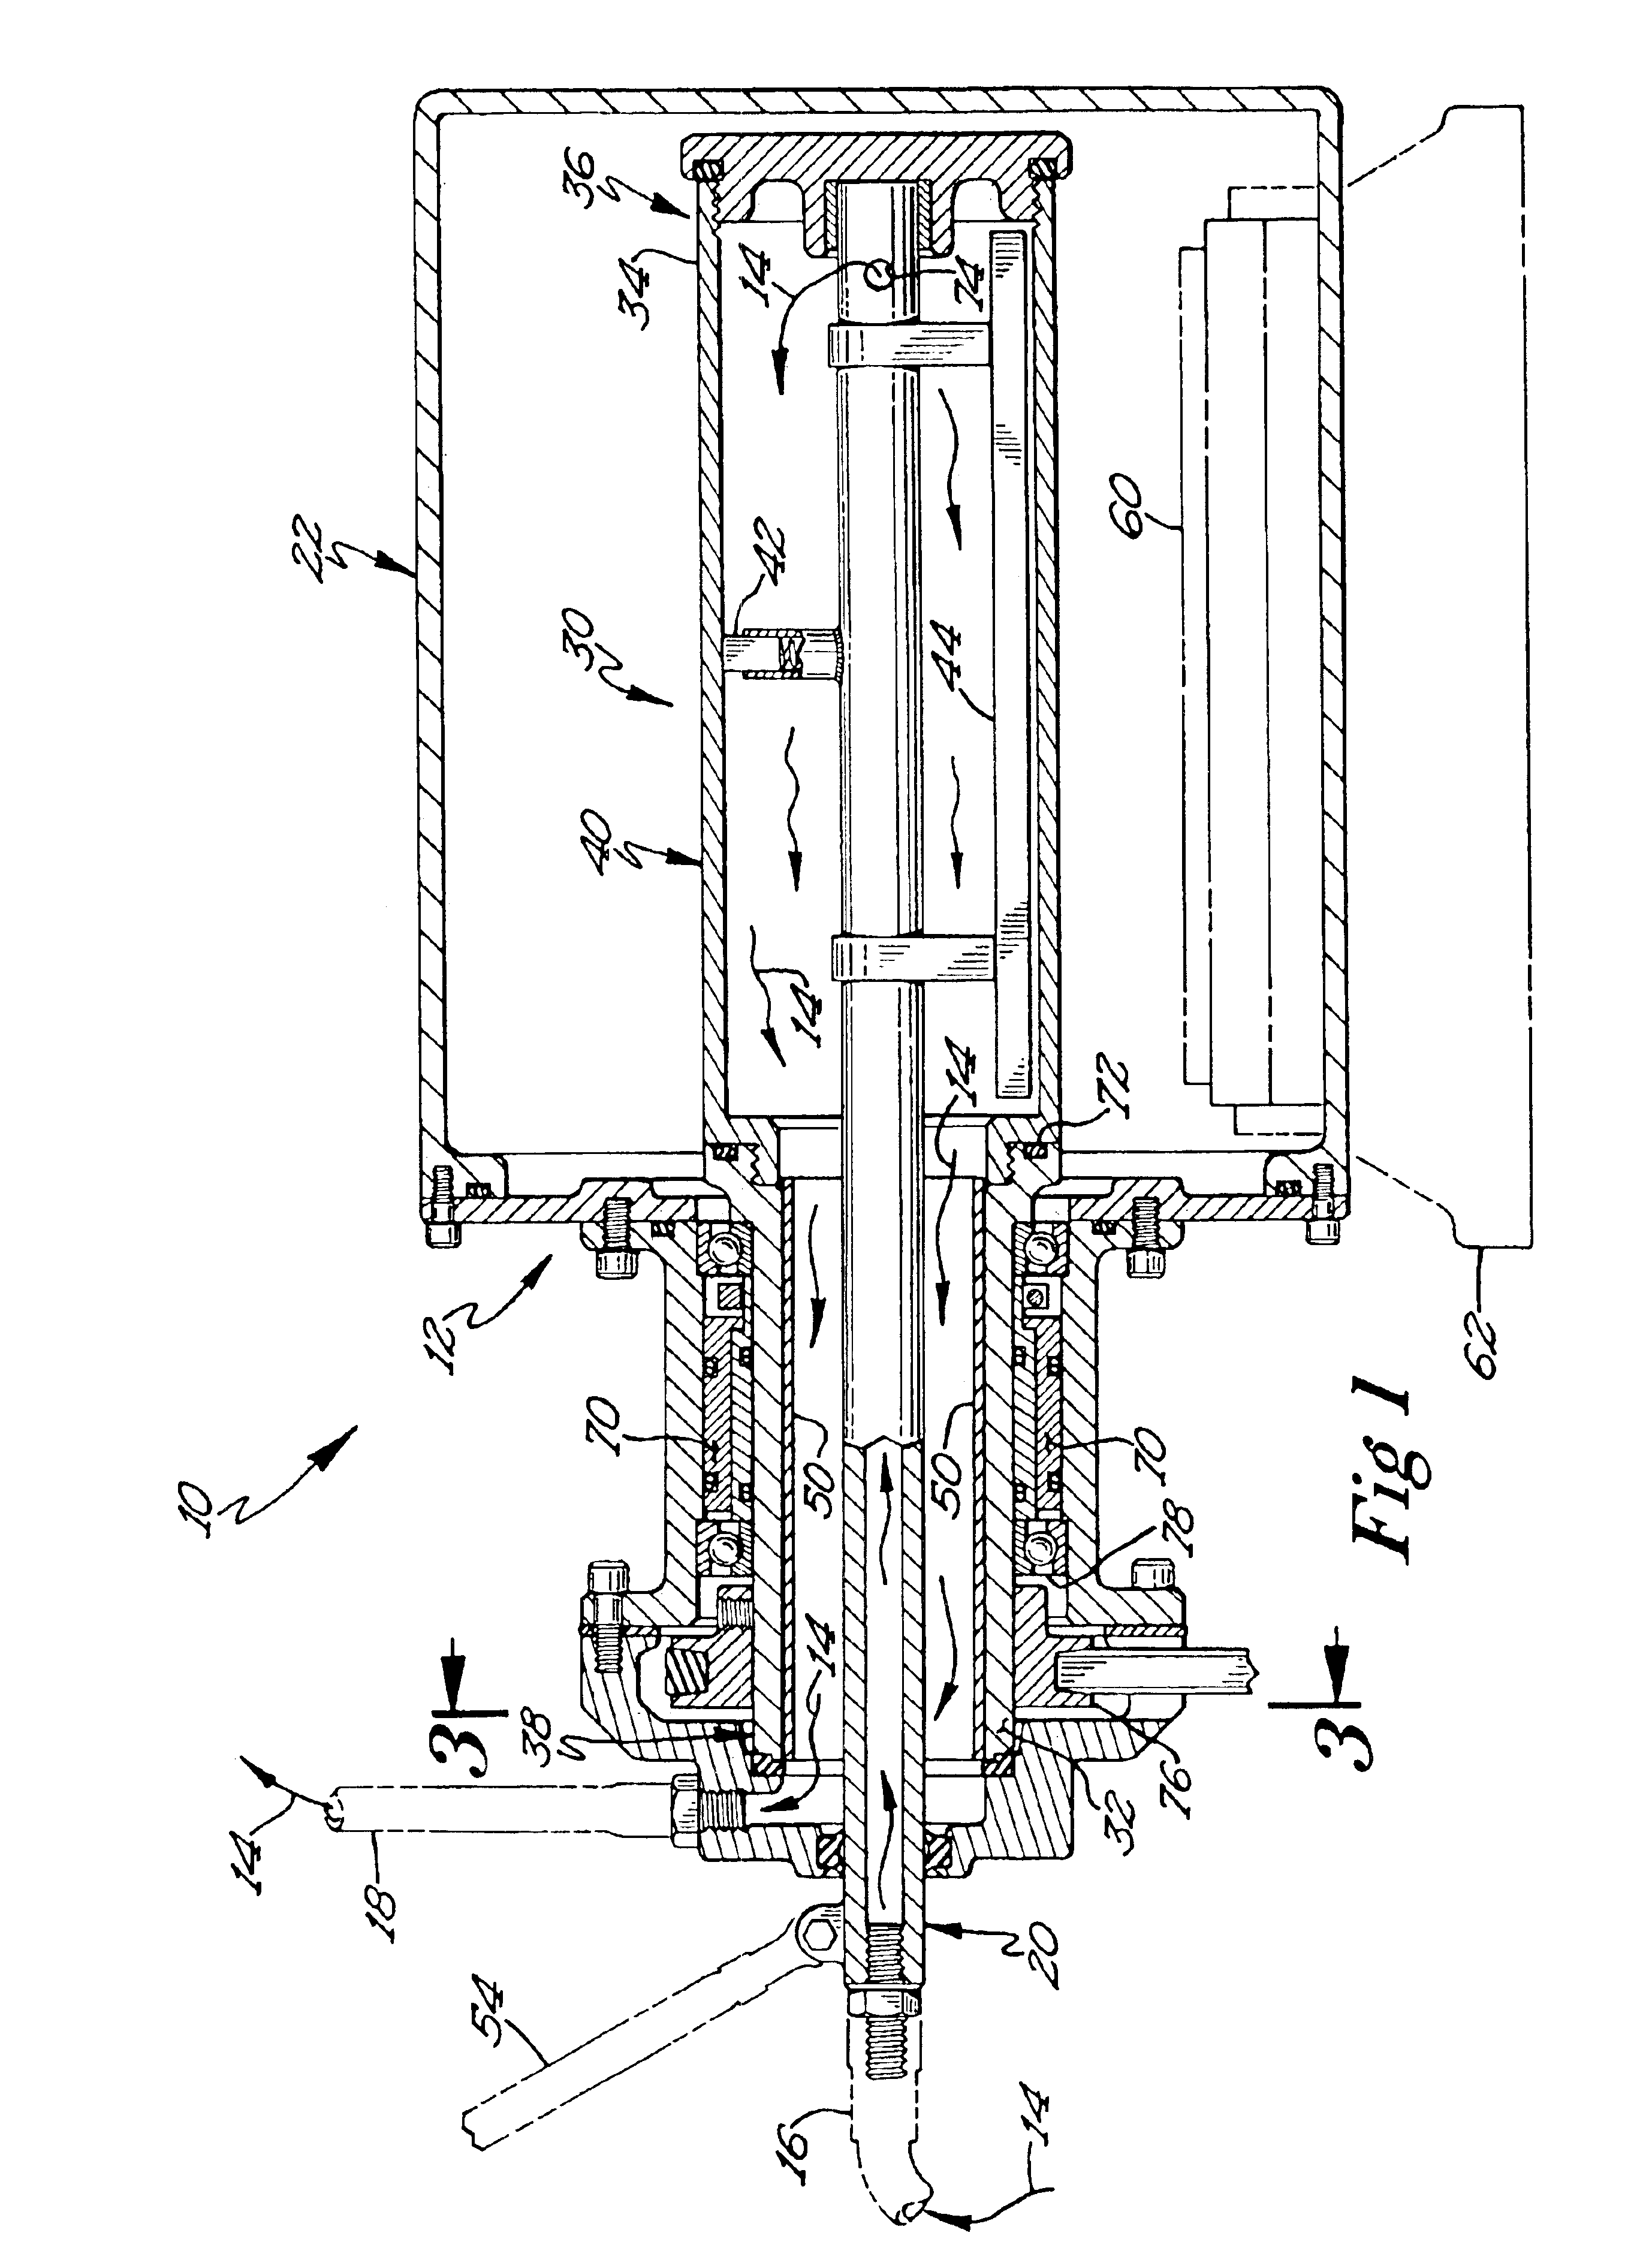 High-power ion sputtering magnetron